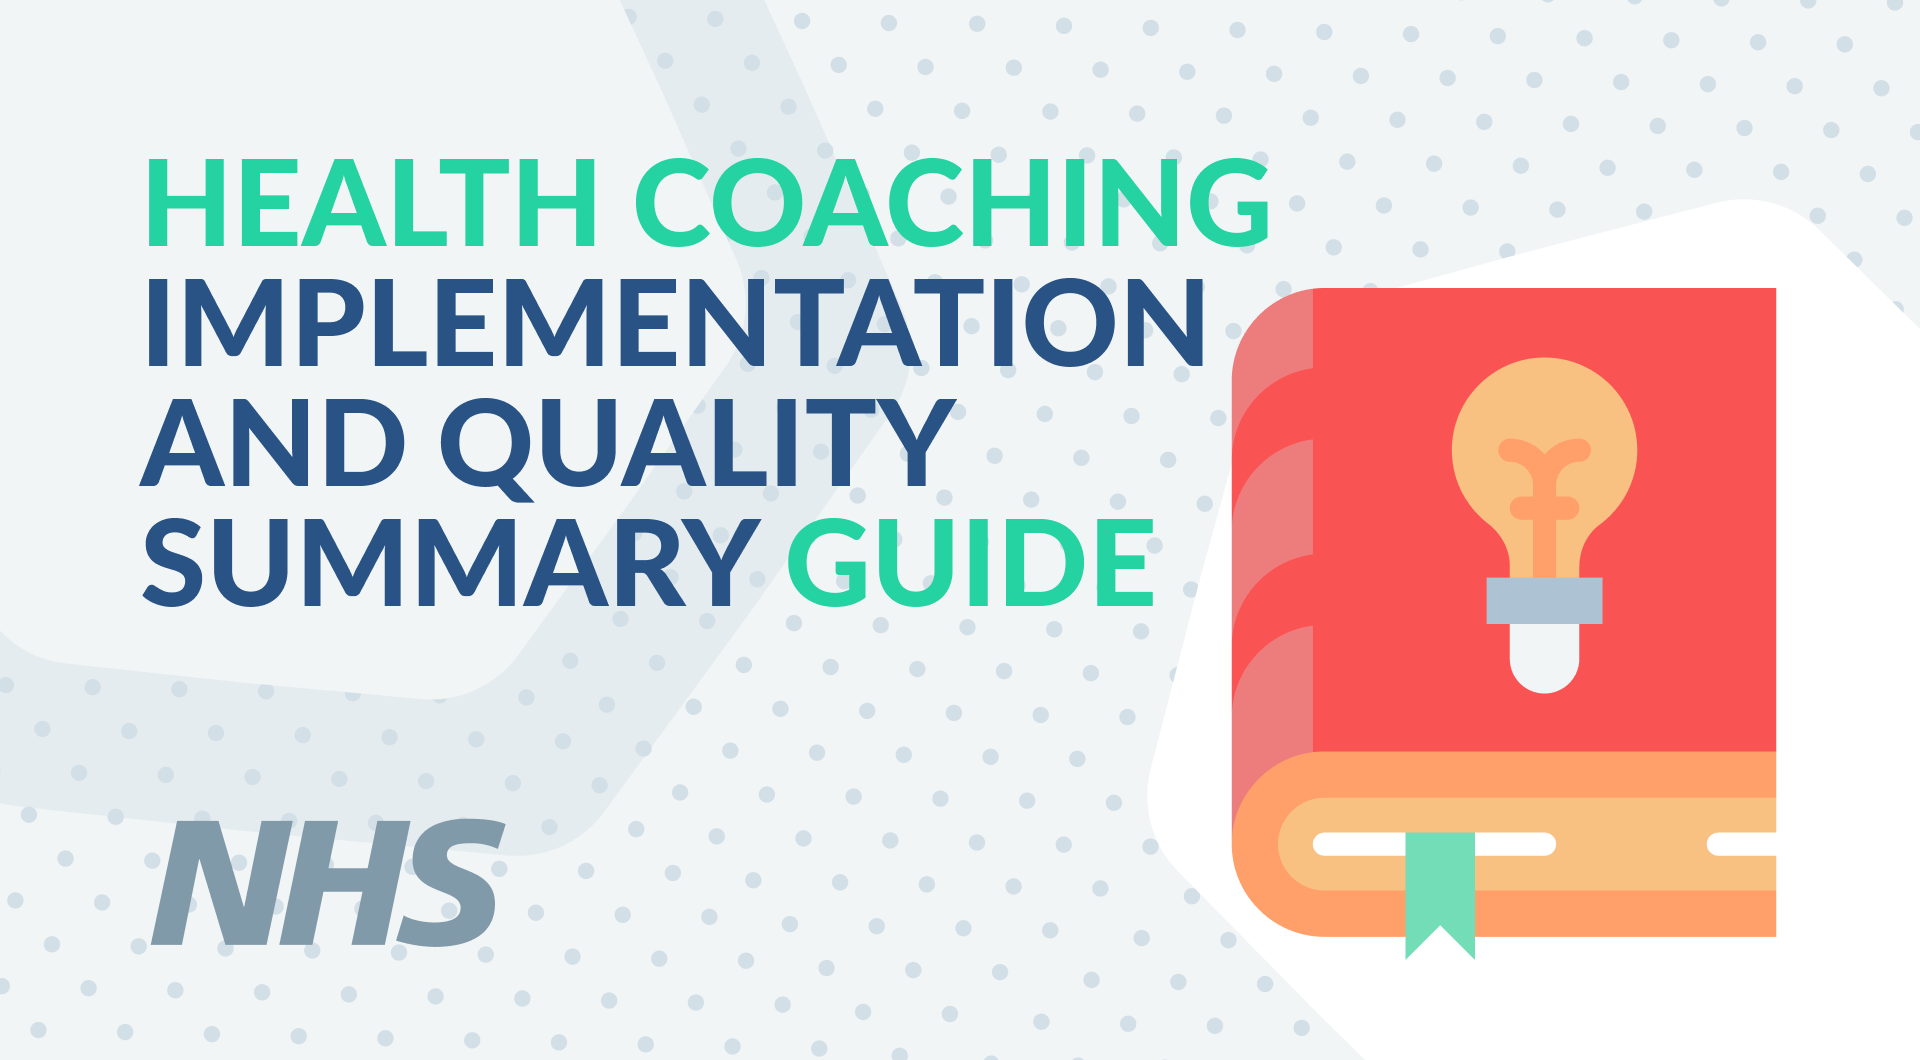 Health Coaching Implementation and Quality Summary Guide